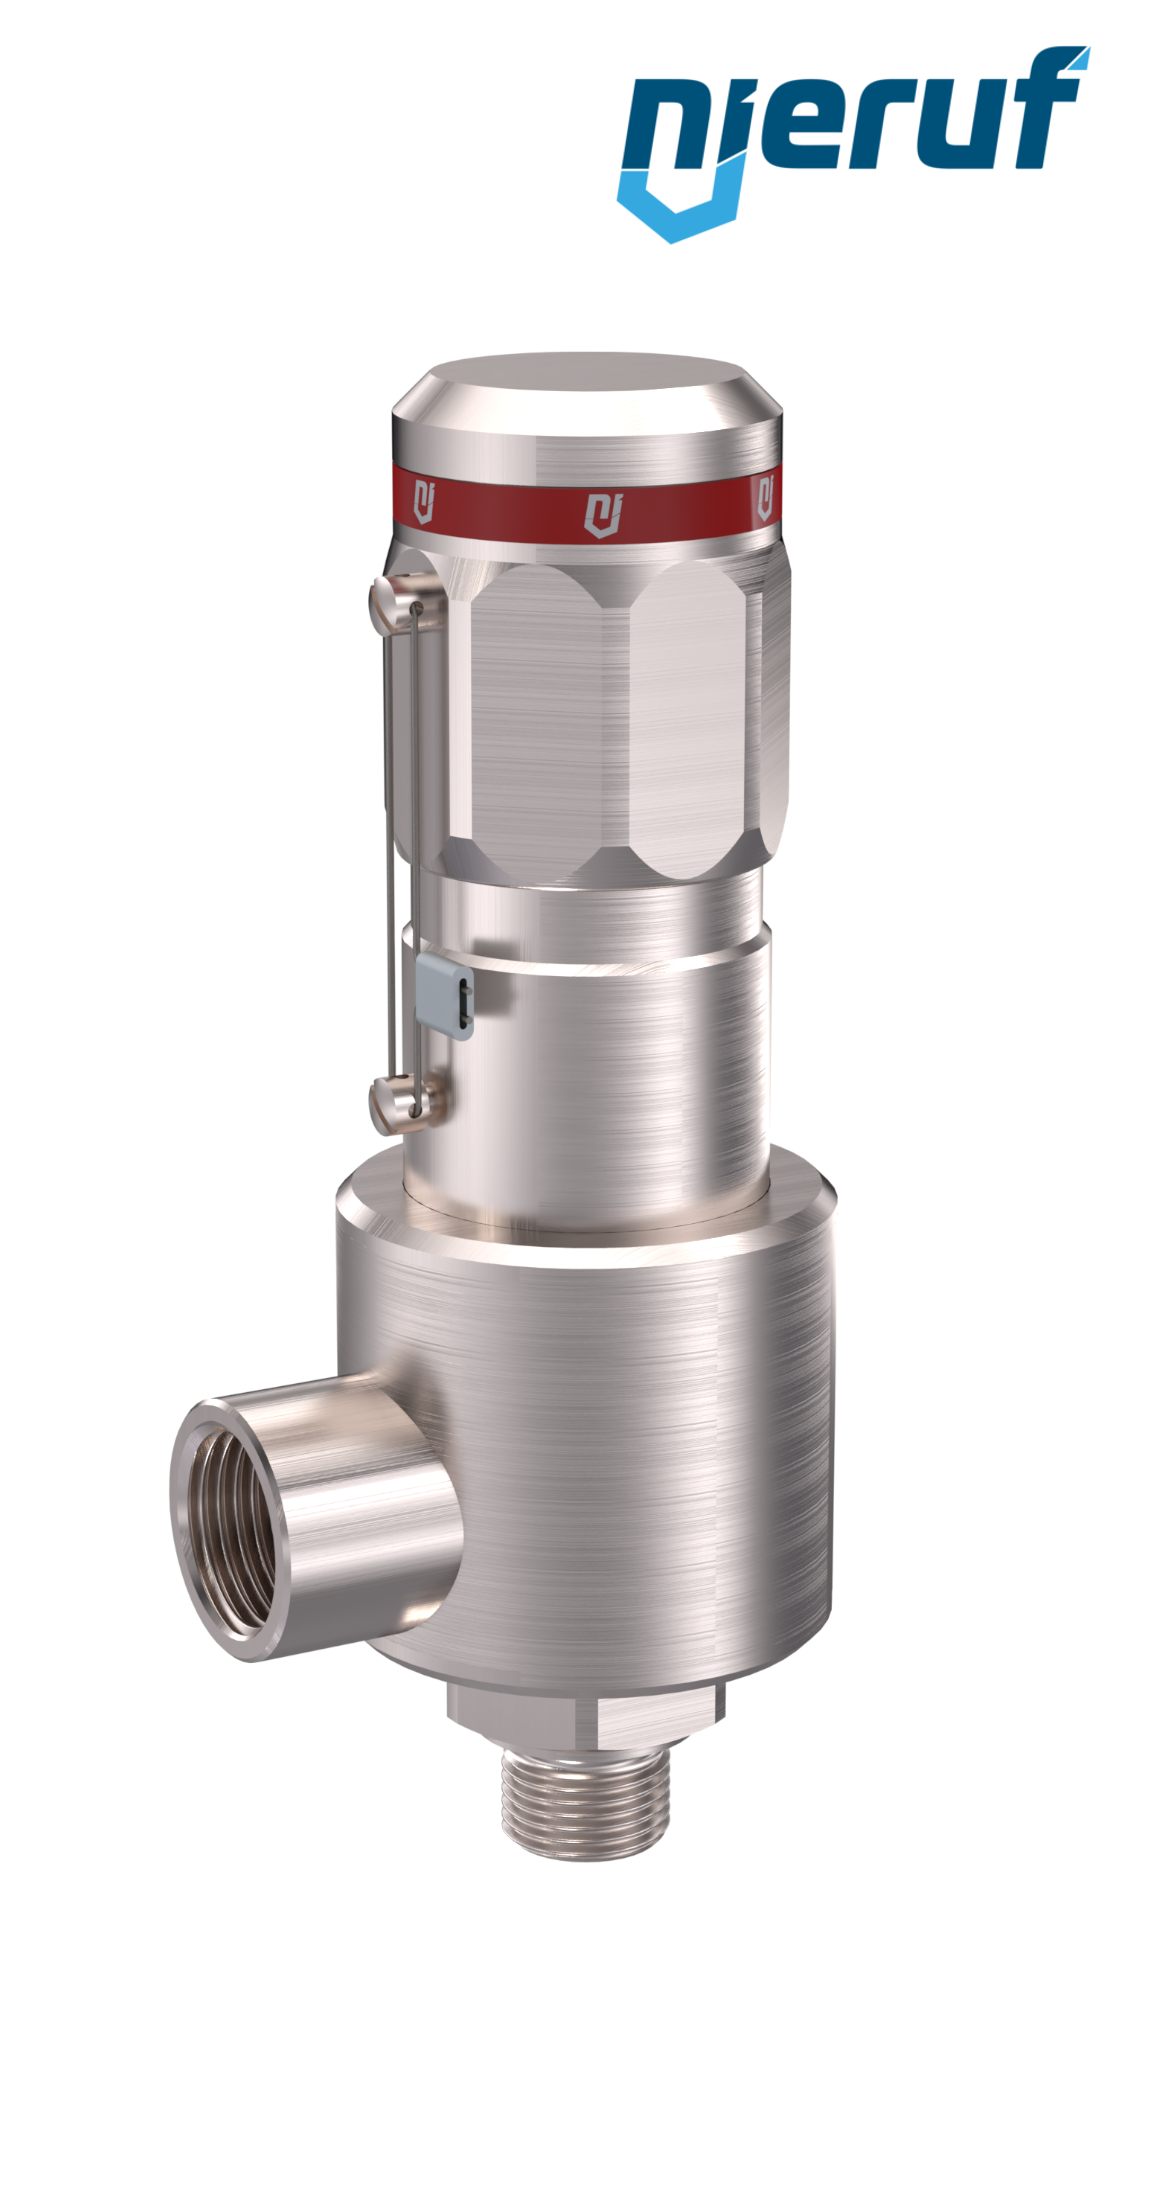 safety-valve DN8 1/2" m x 1/2" fm male thread NPT, SV15, MD/ PEEK, without lifting device, angle-type, 100,0 - 600,0 bar